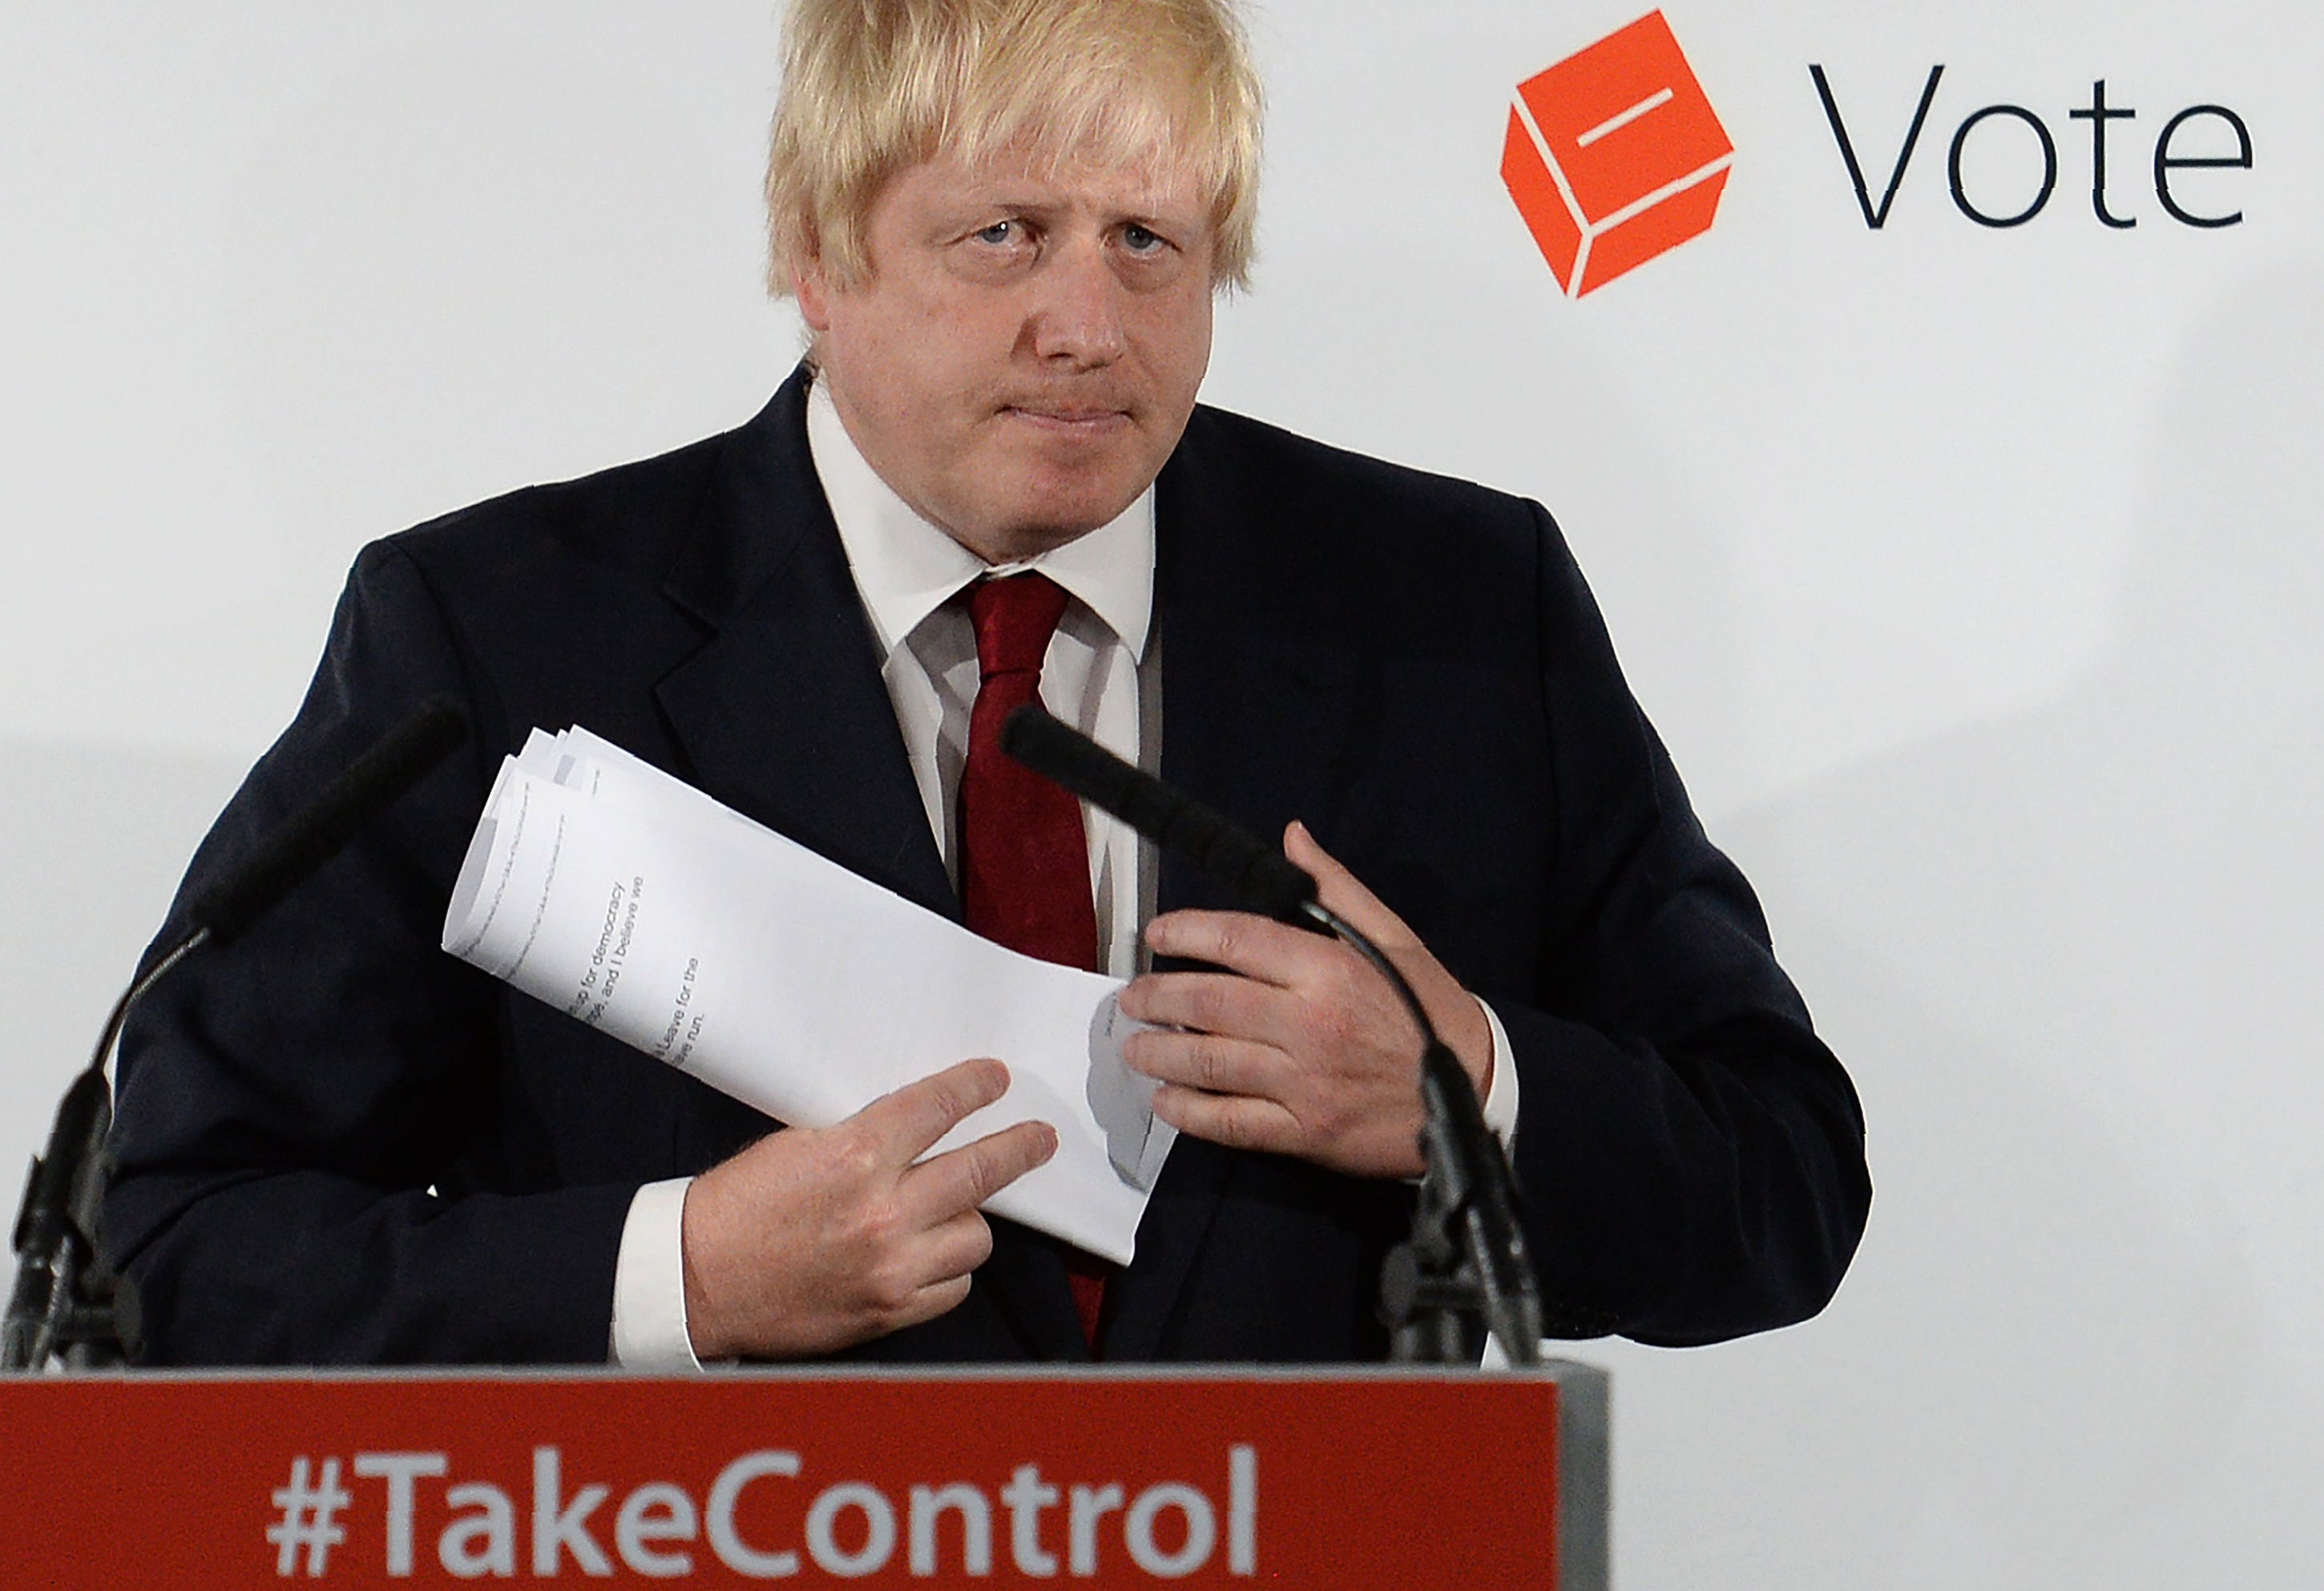 The British believed Boris Johnson and thought they could have their cake and eat it